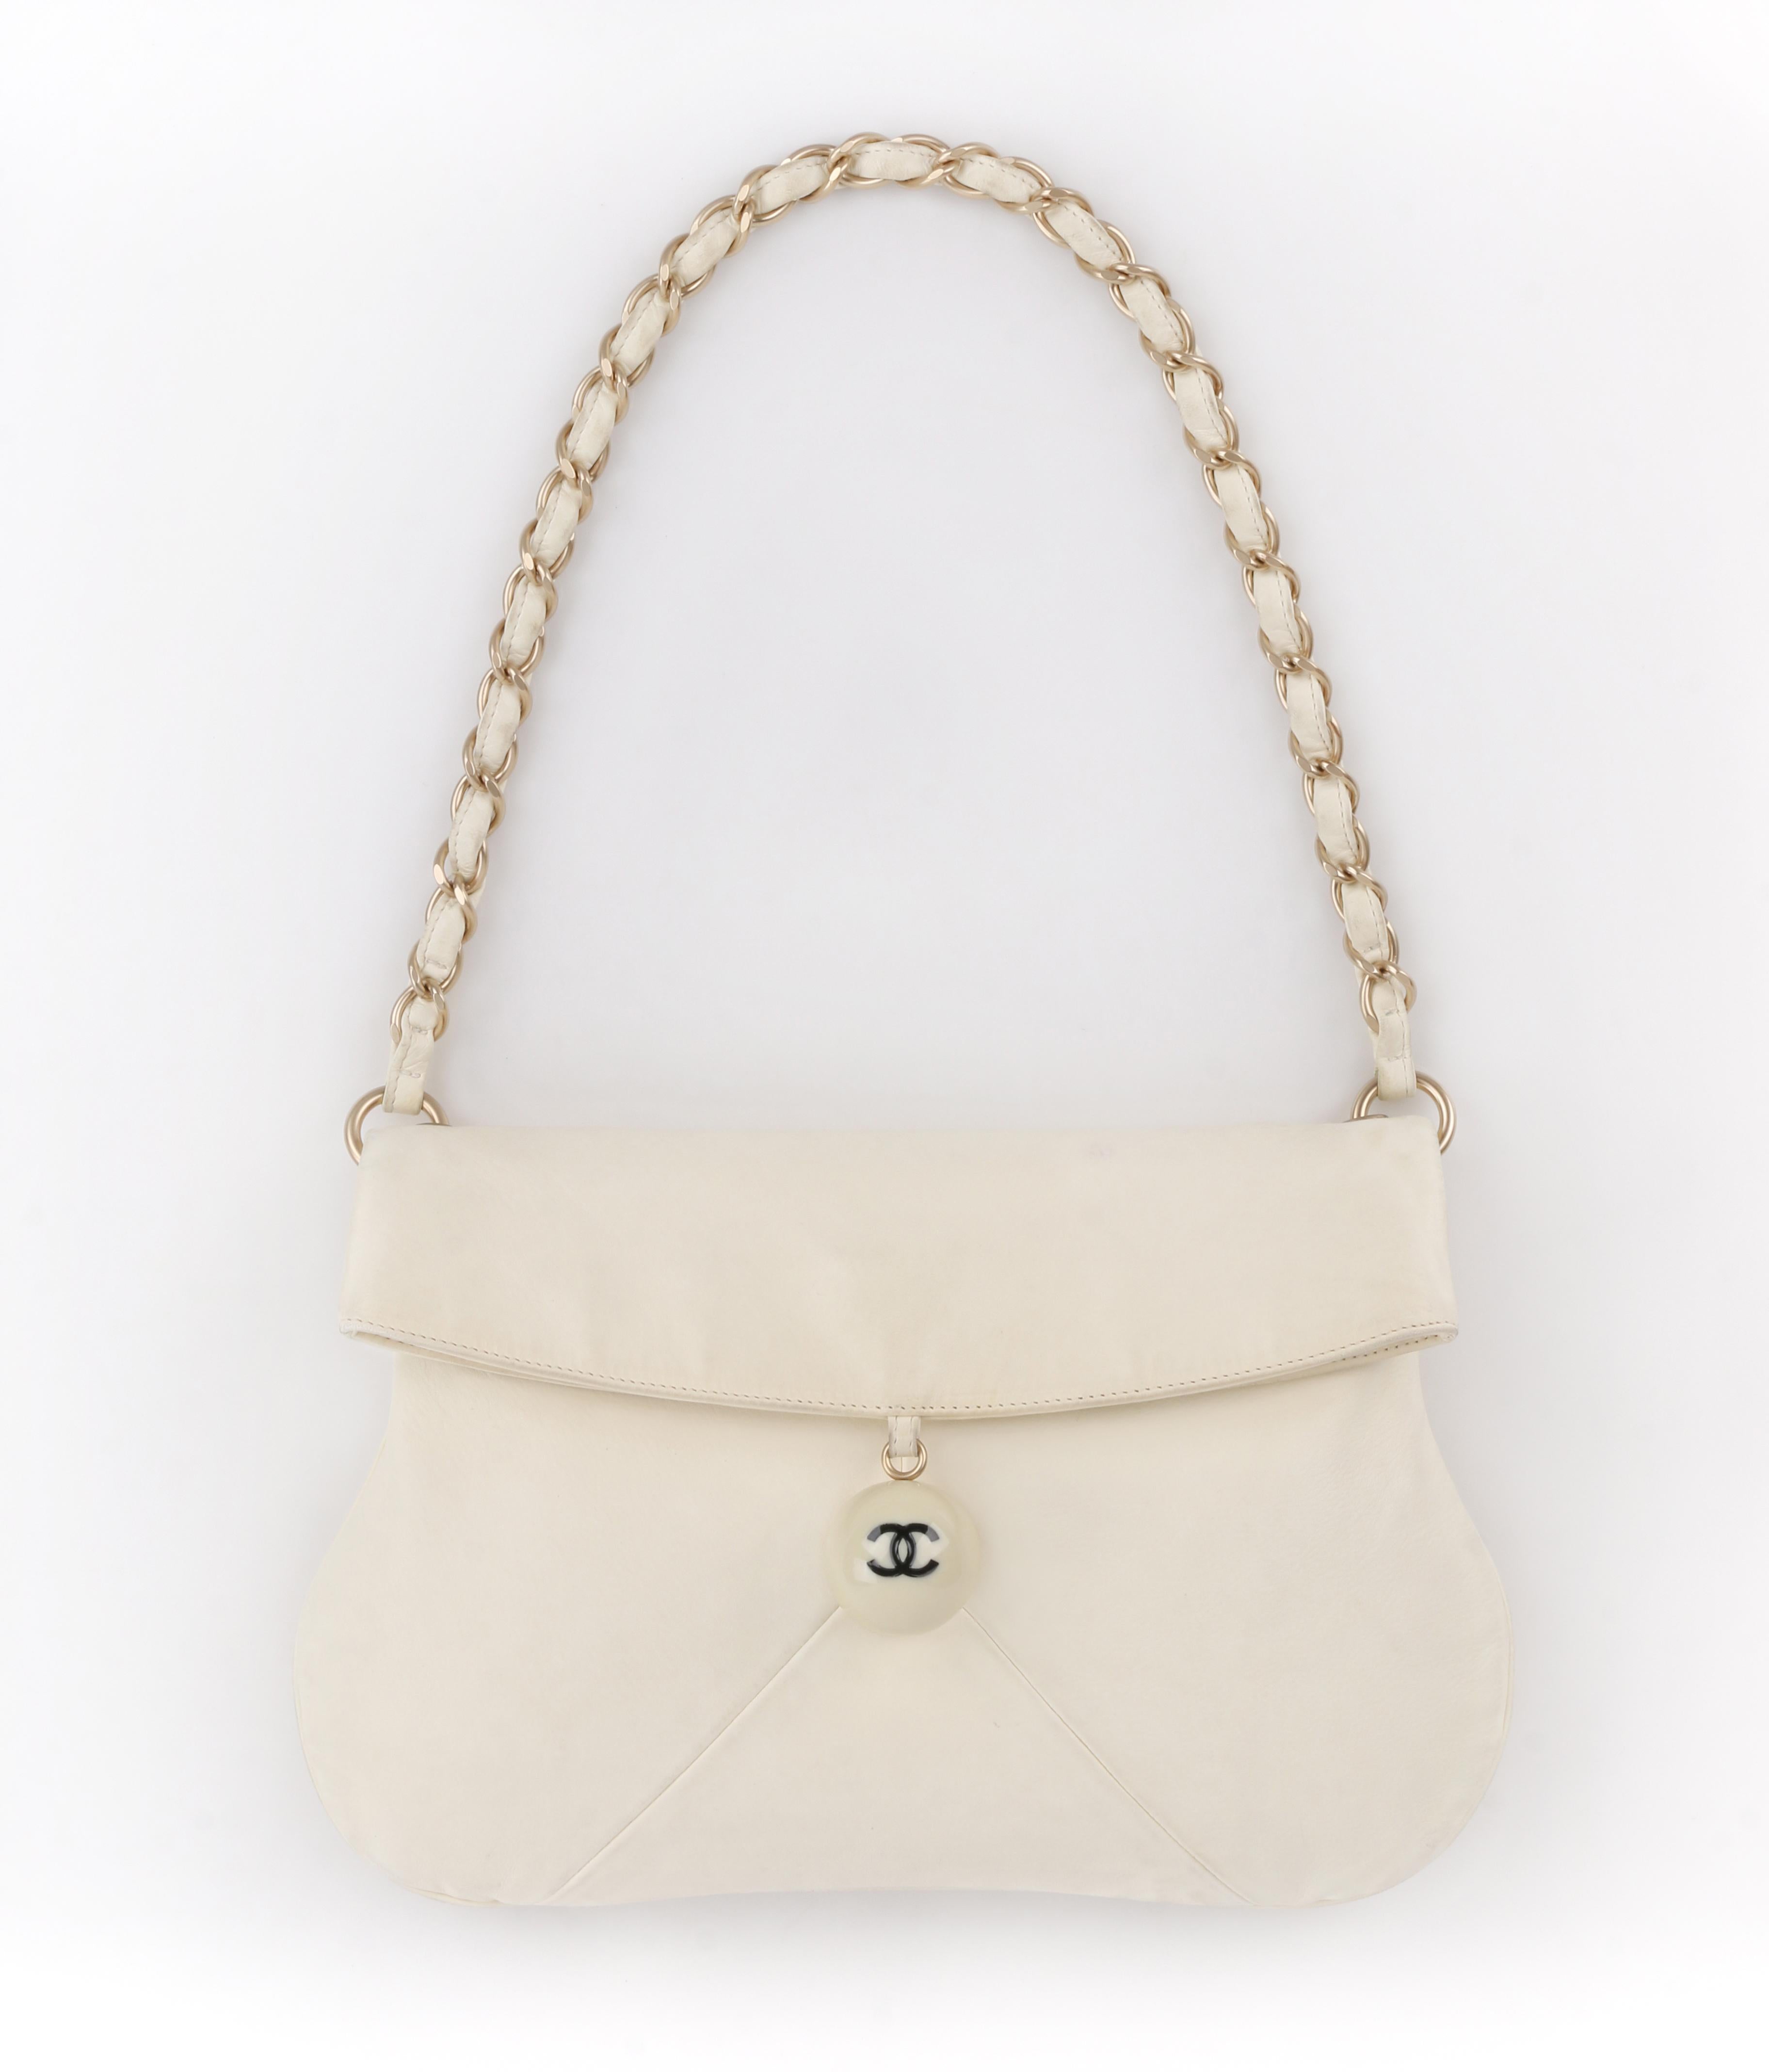 CHANEL c.2003 Ivory Lambskin Leather Coco Cue Ball Braided Chain Shoulder Bag
  
Brand / Manufacturer: Chanel
Collection: c.2003
Designer: Karl Lagerfeld
Style: Shoulder bag
Color(s): Shades of ivory (exterior); shades of off-white (interior); gold